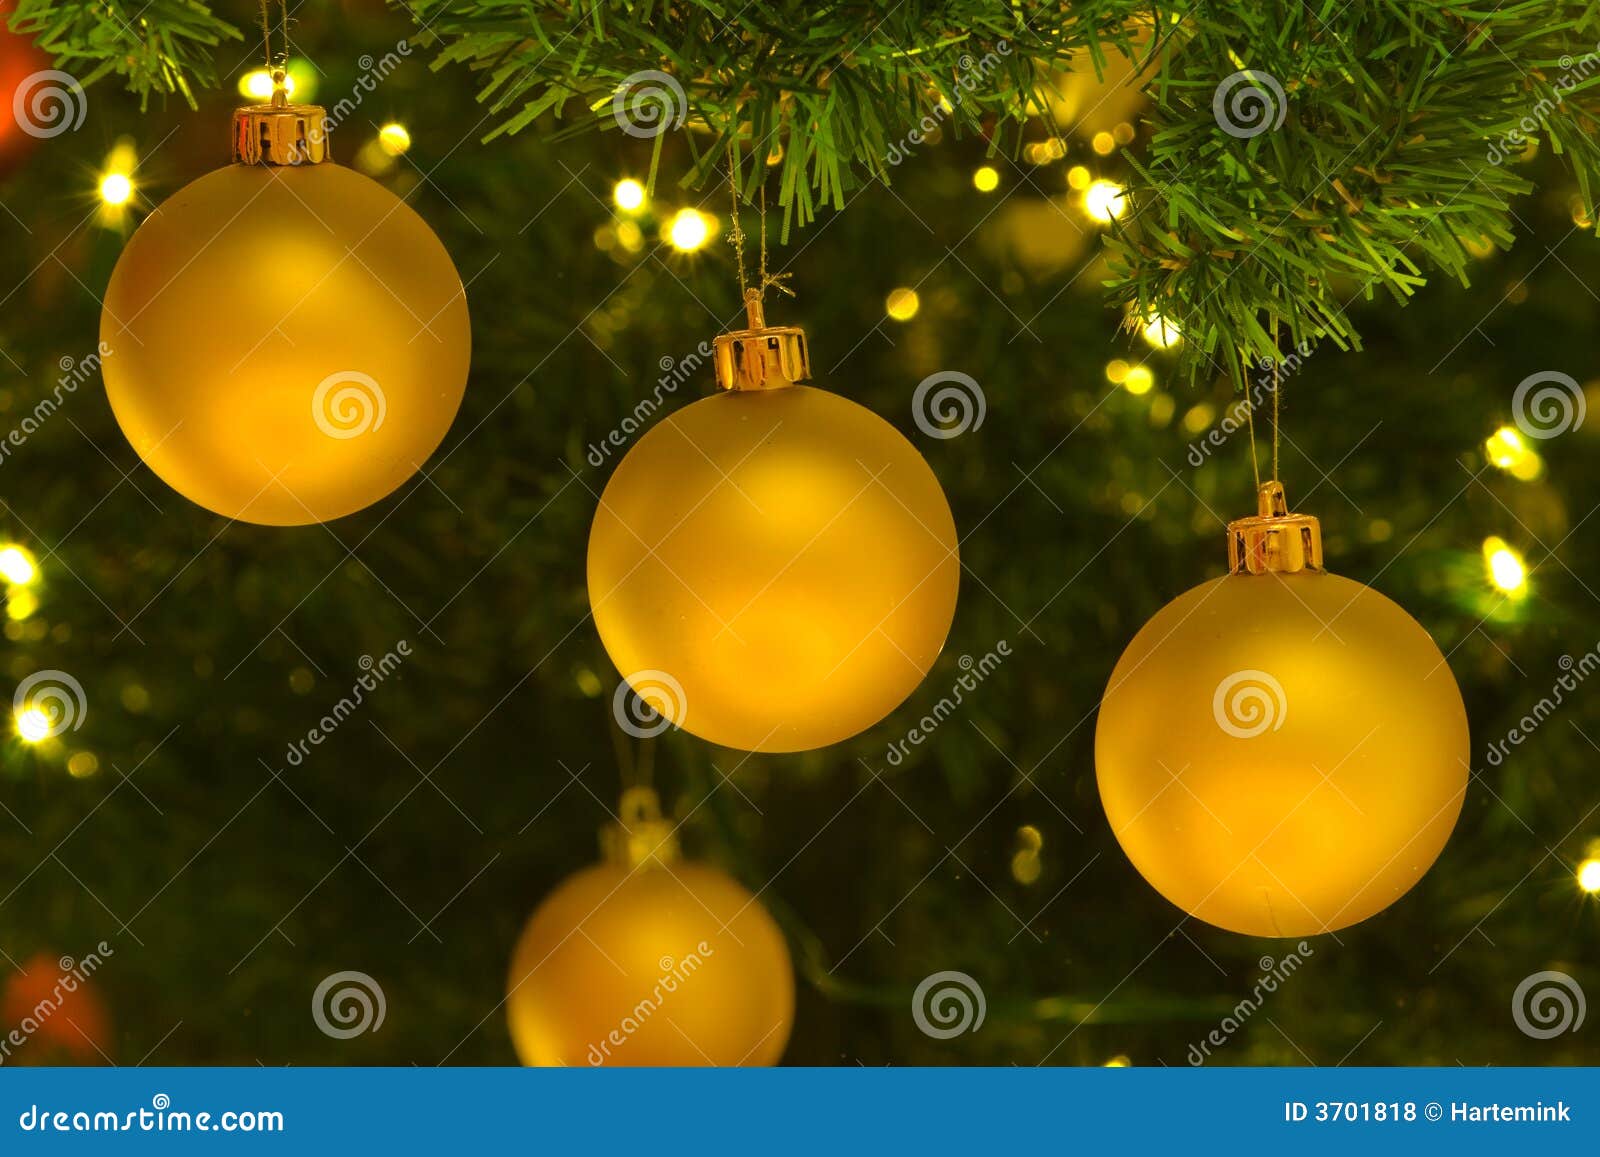 Yellow Christmas Ornaments In Christmas Tree Royalty Free Stock Photos ...